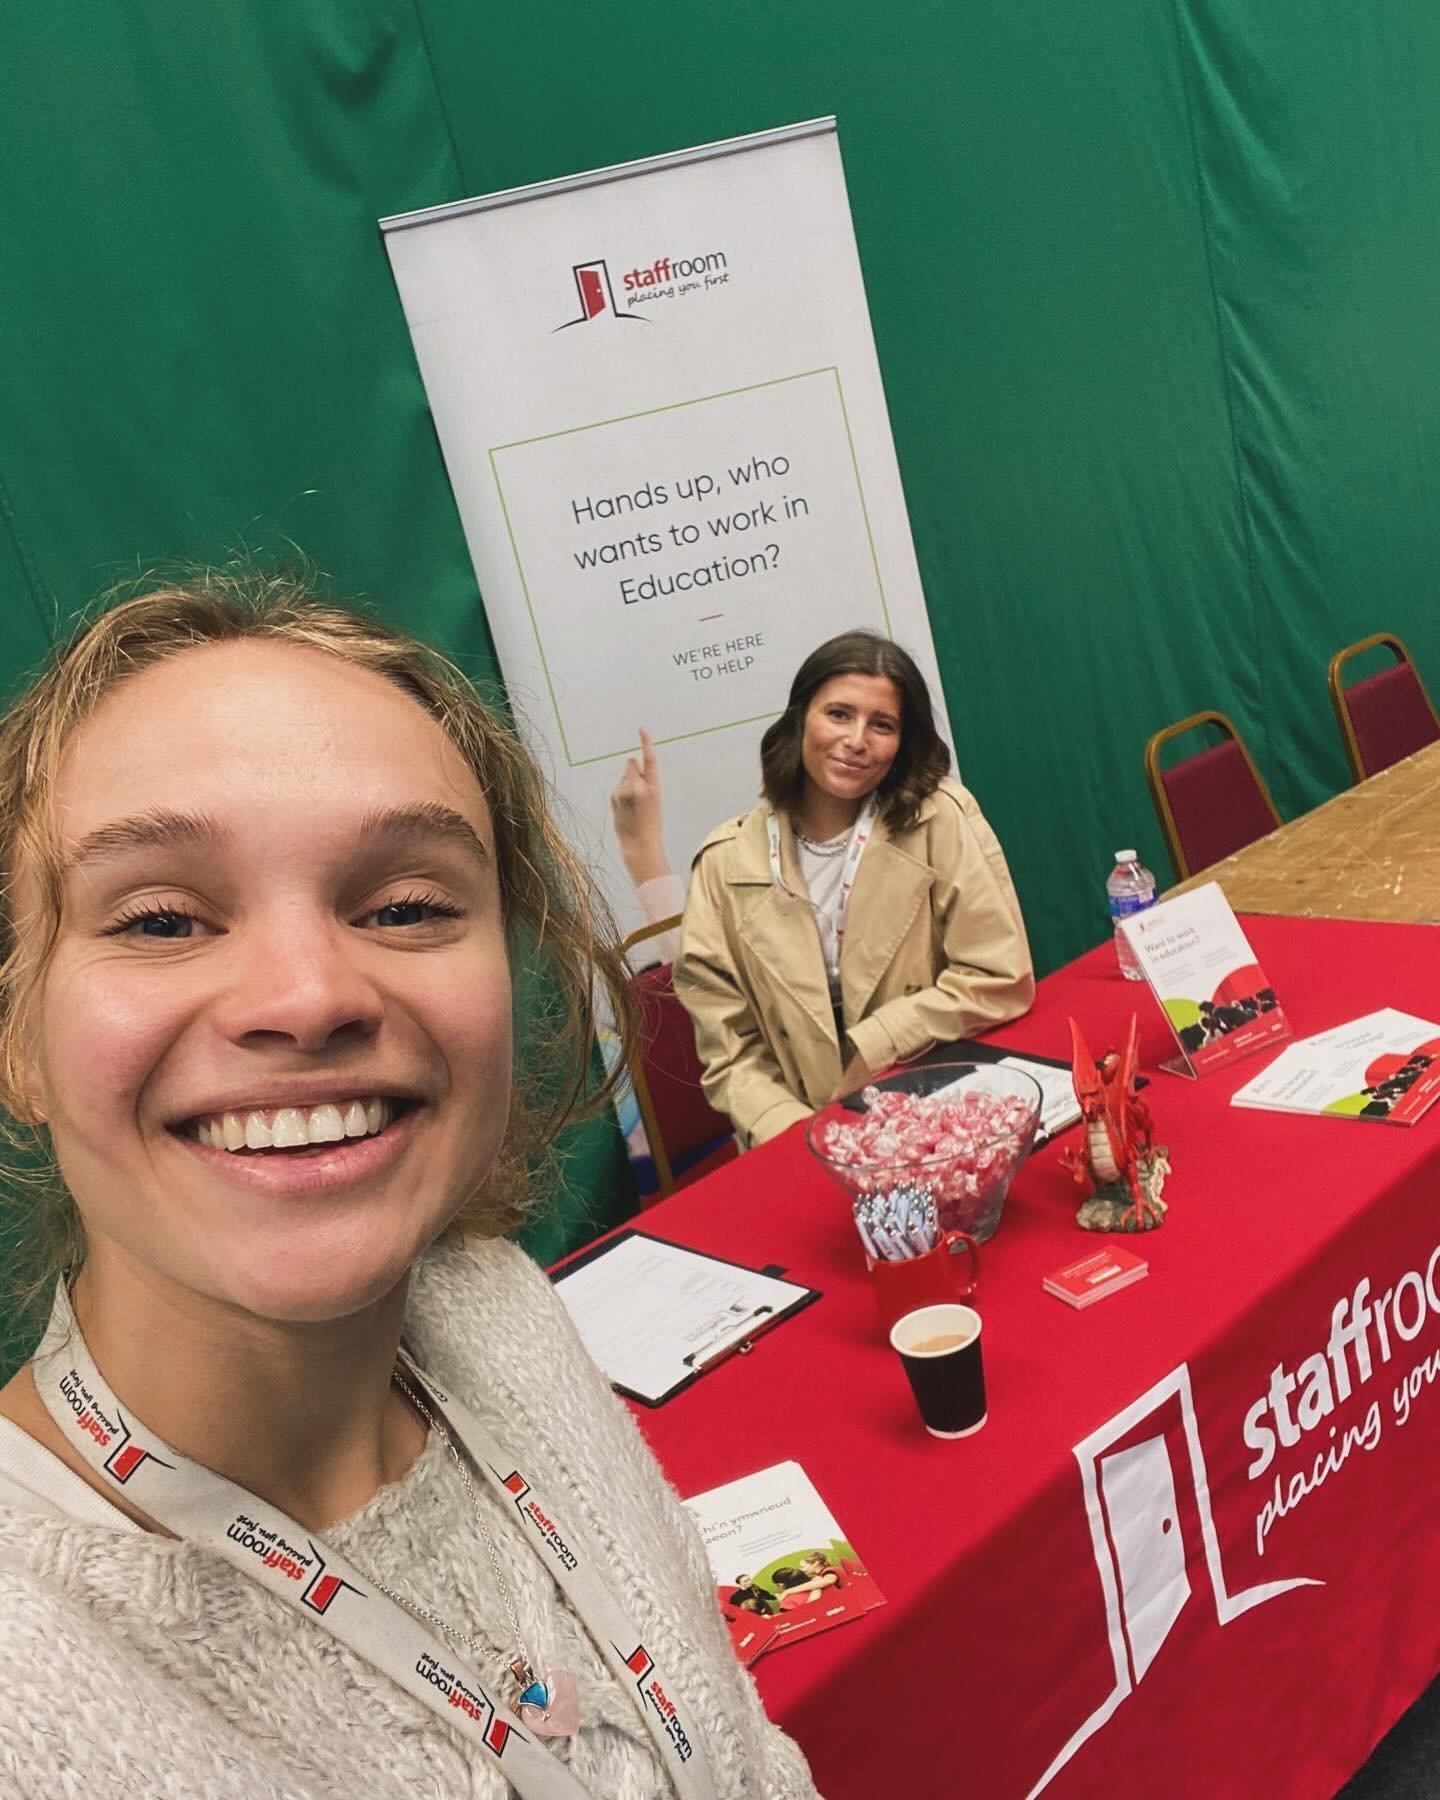 Freya &amp; Kirsten are set up and ready to talk all things supply at @uswsport park today, they&rsquo;ll be in the sports hall until 2pm so come over and say hello 👋🏼 

#careerfair #jobsfair #usw #newportjobs